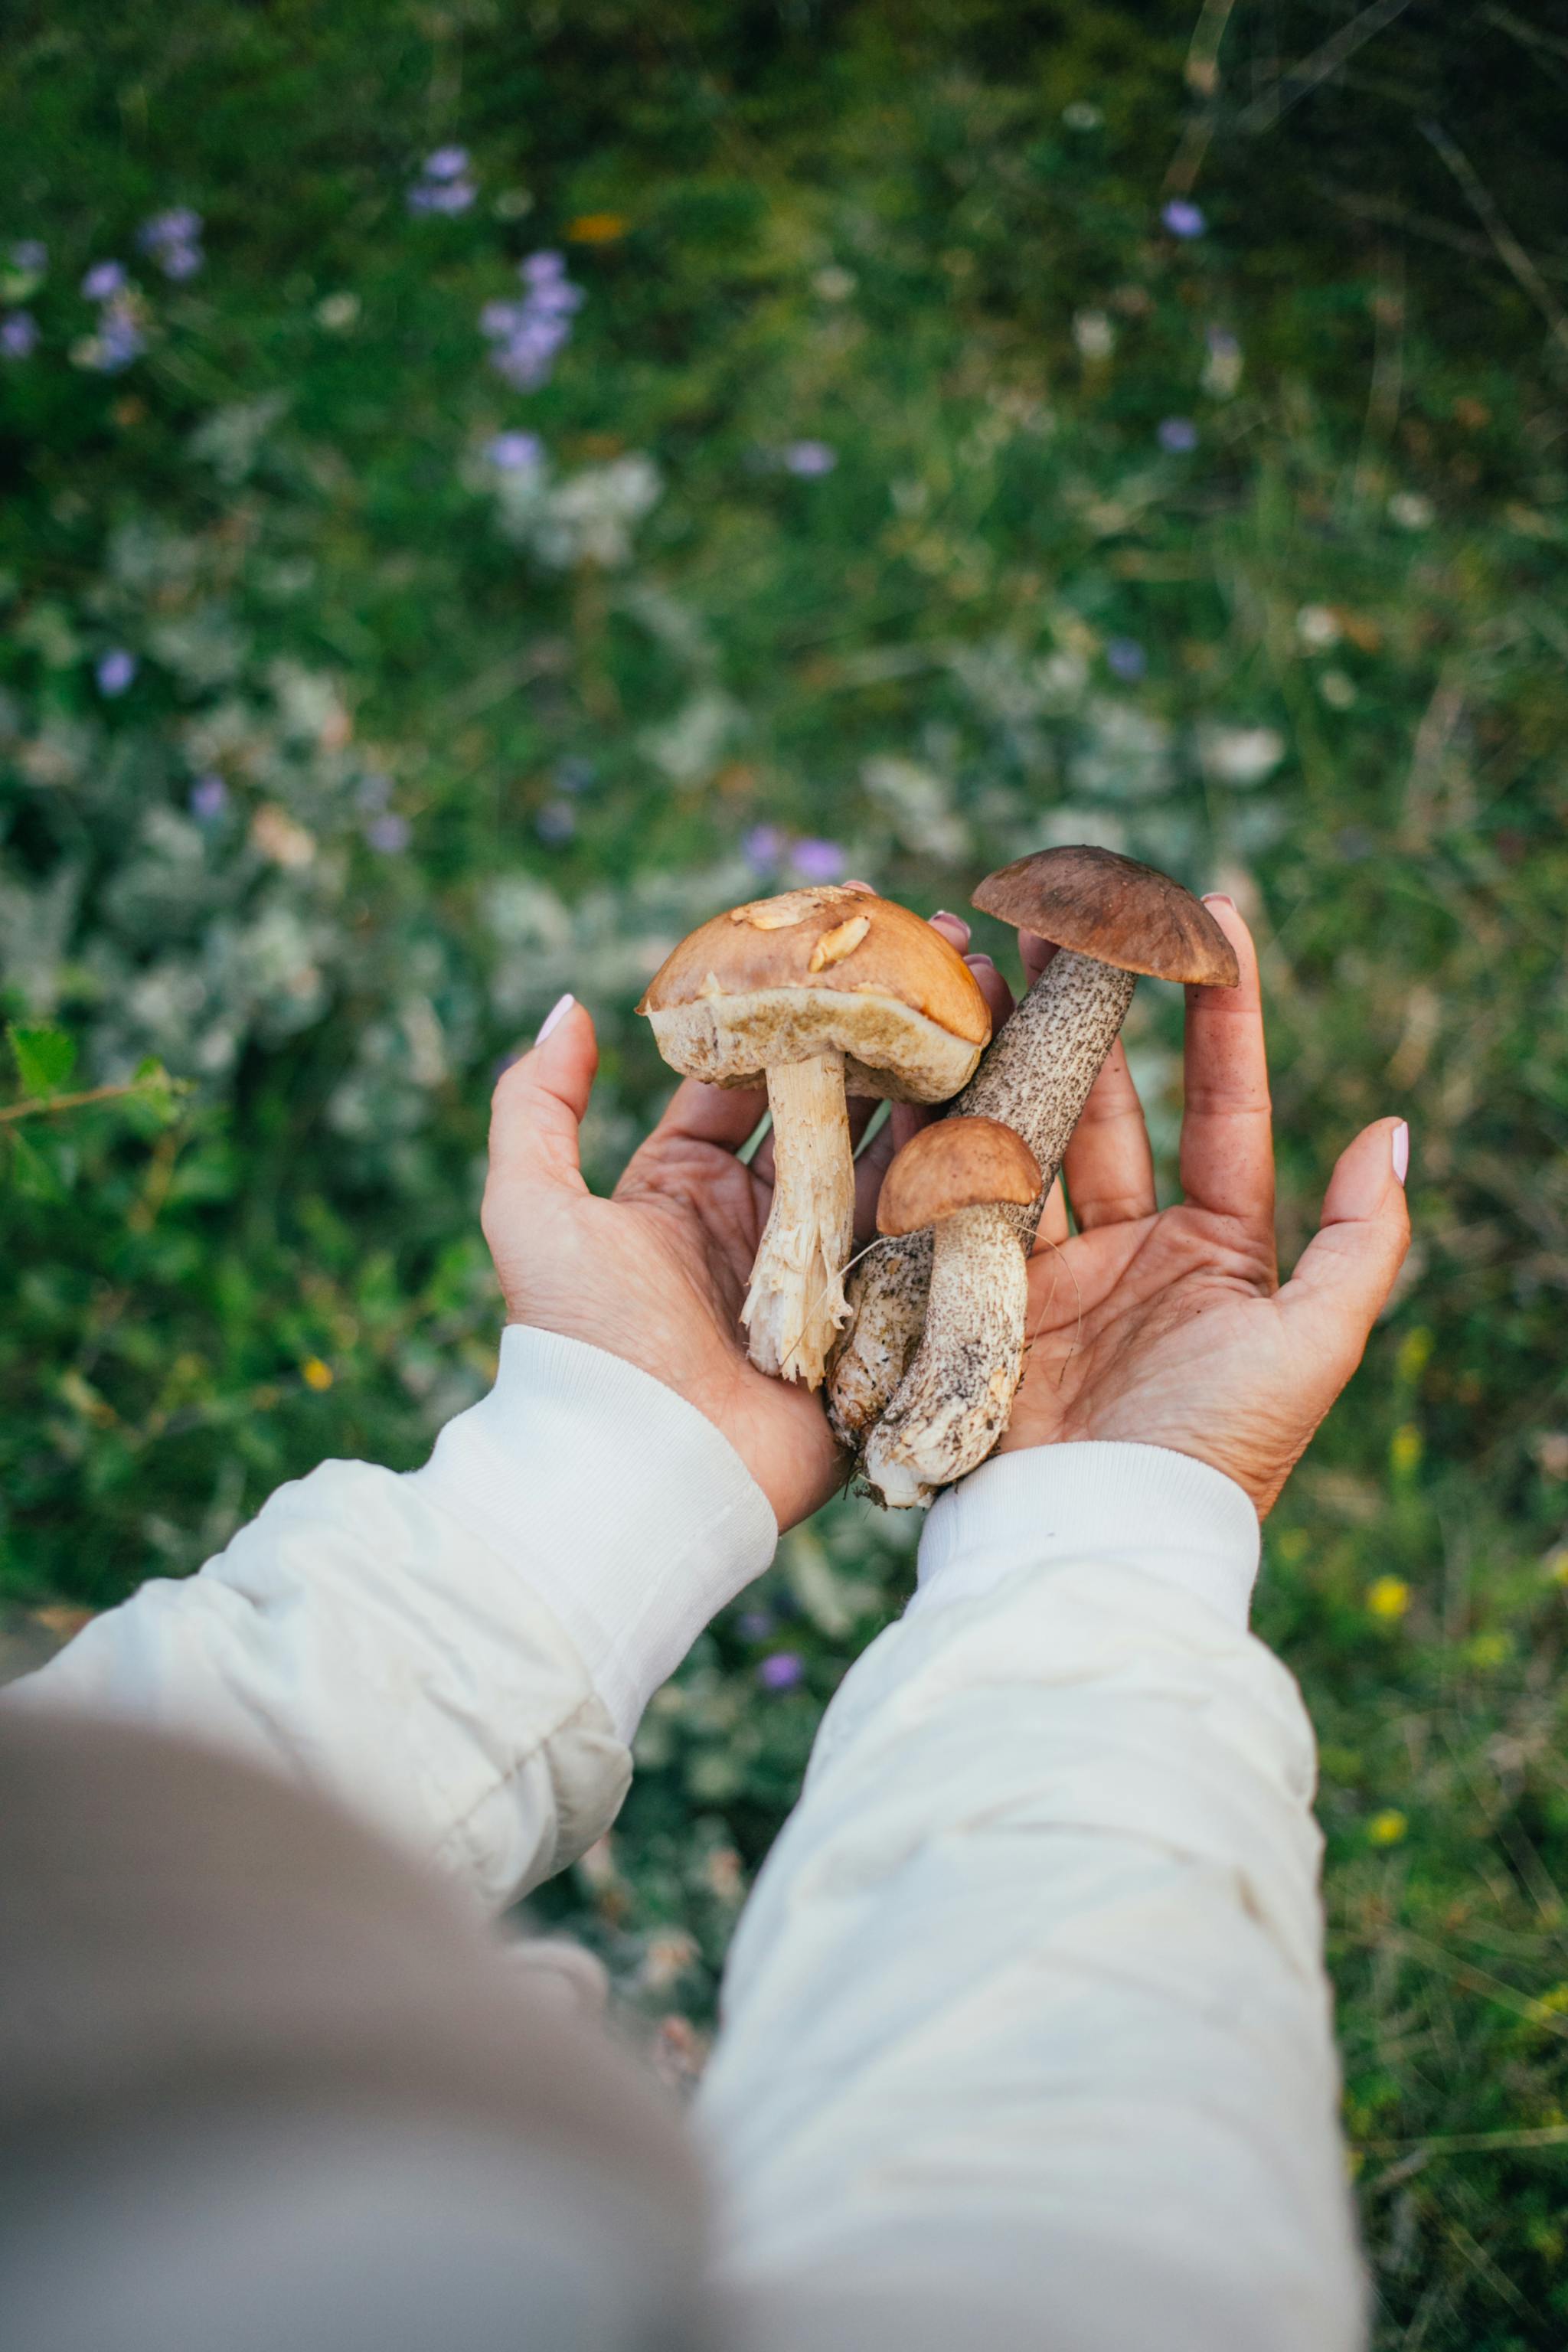 Person holding mushrooms in a grassy spot